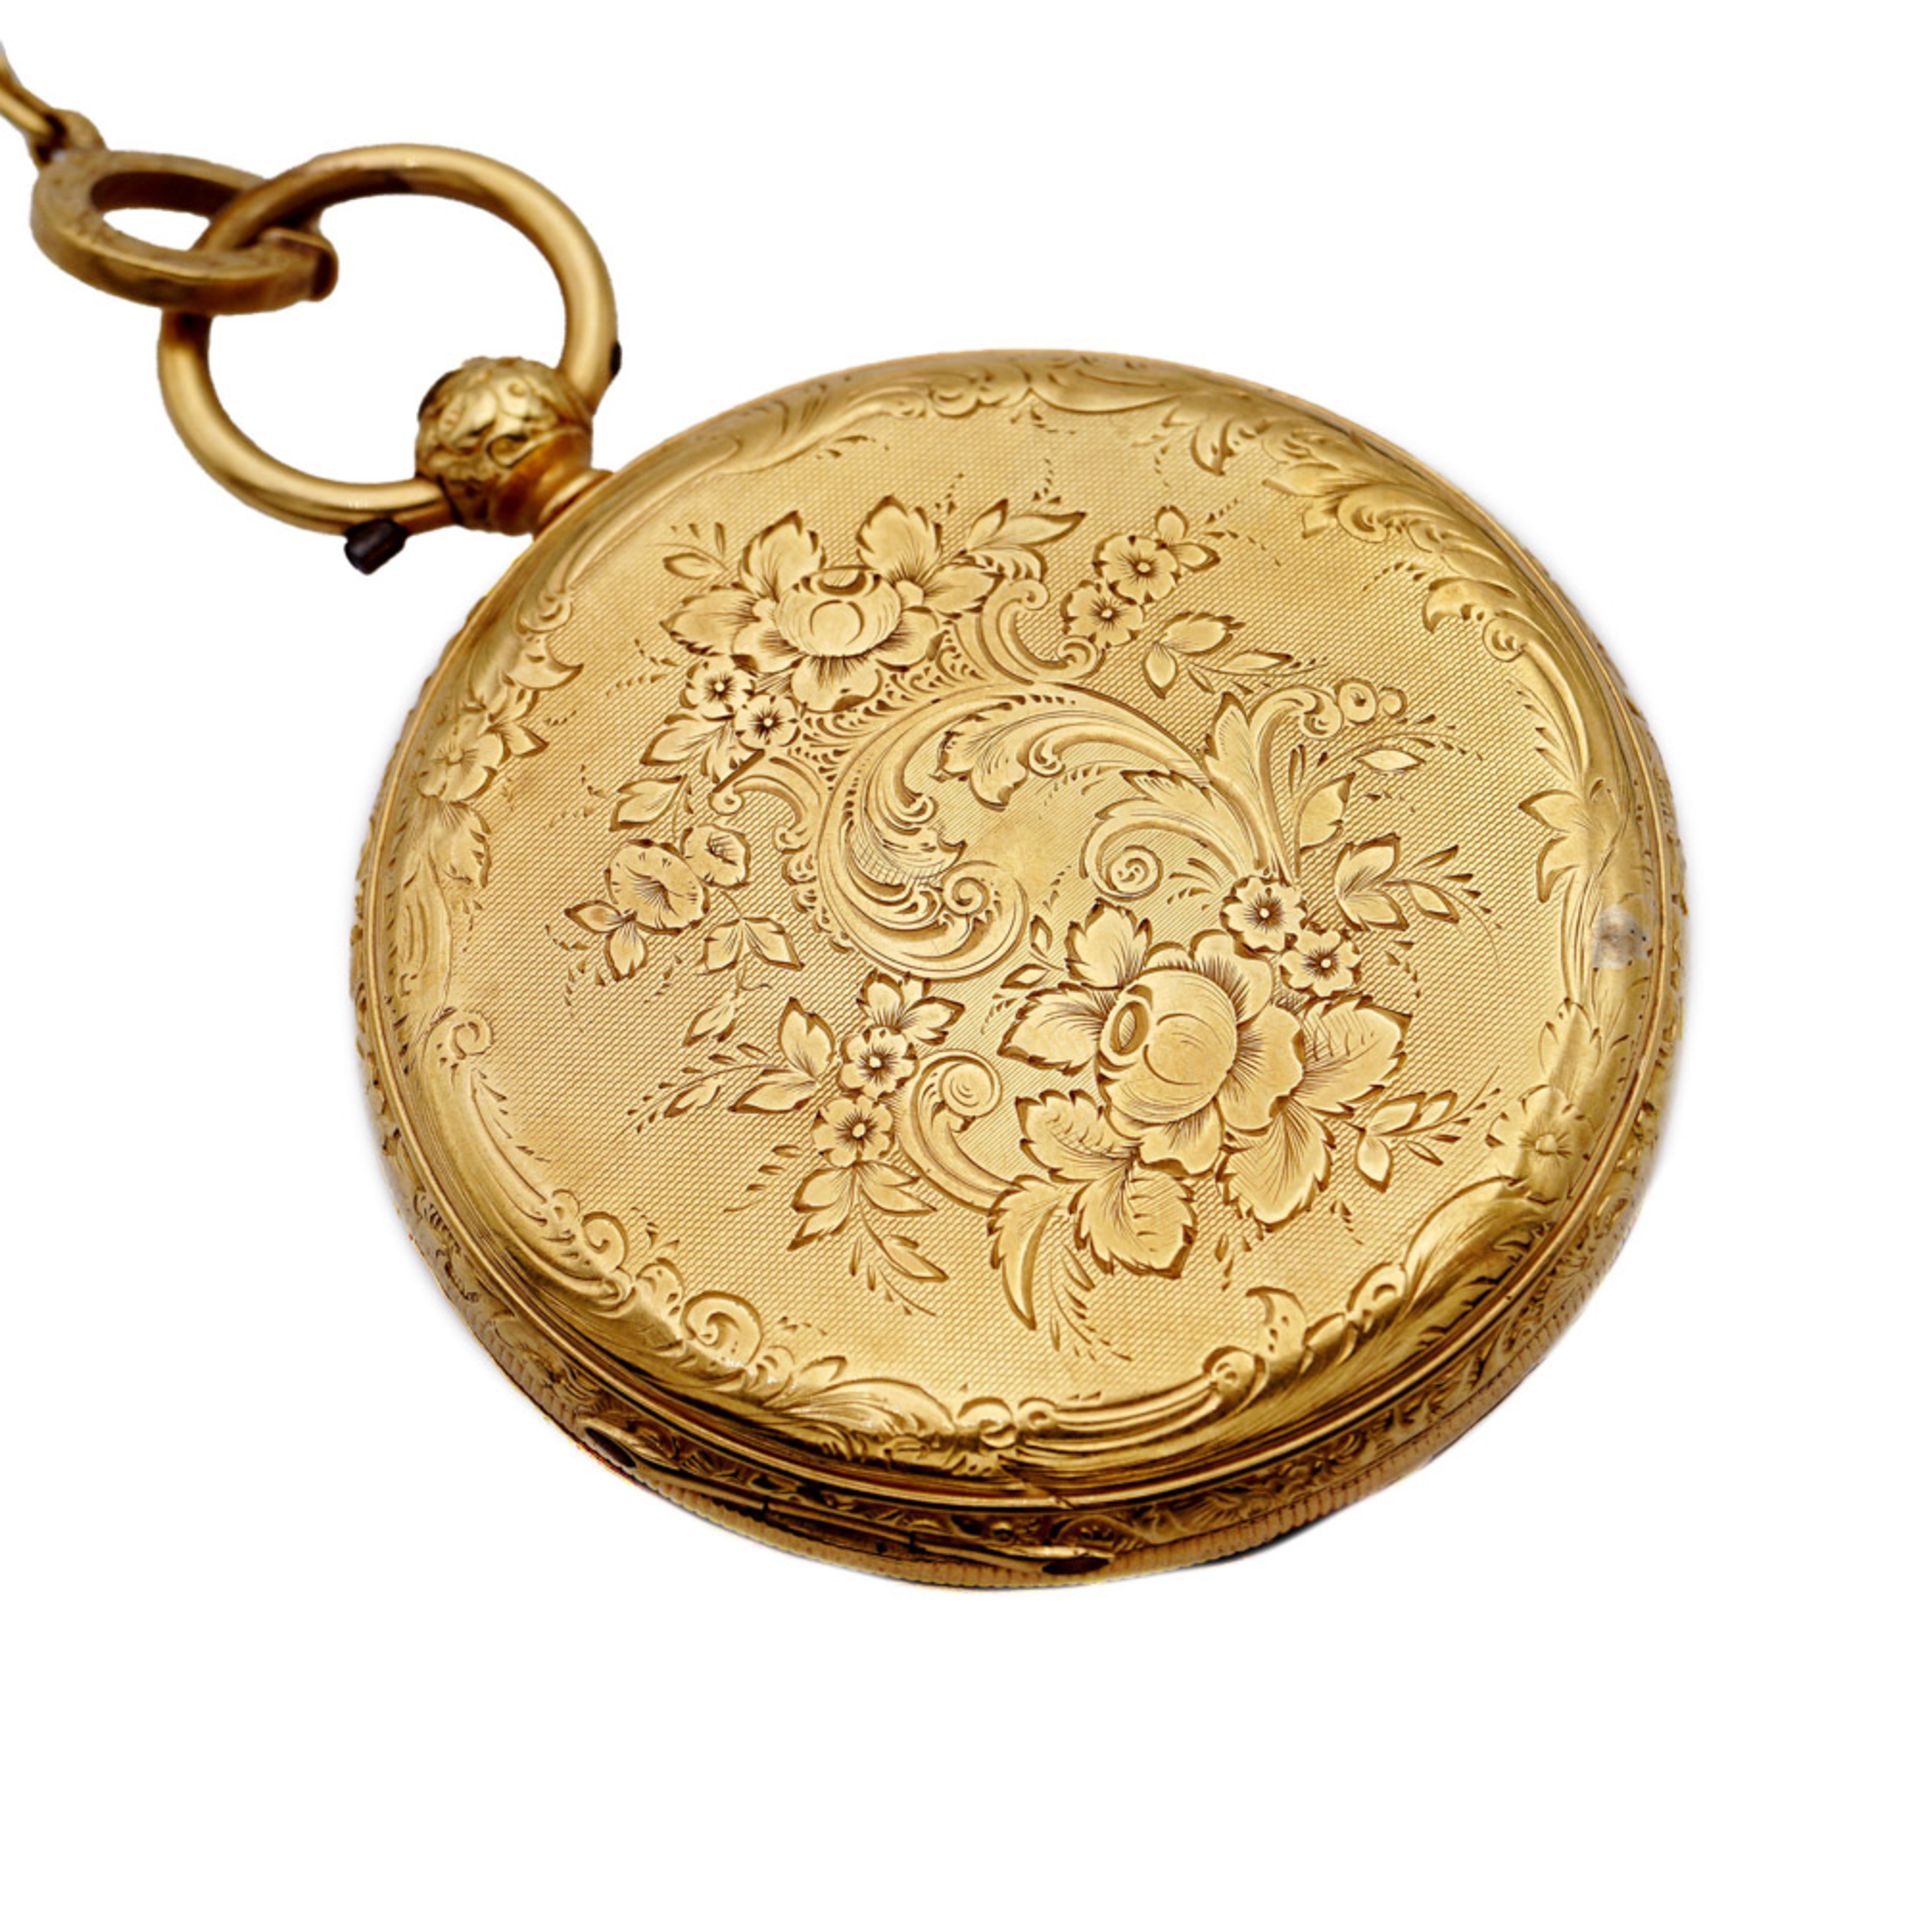 Aiguille, savonette pocket watch with chain and key - Image 3 of 4